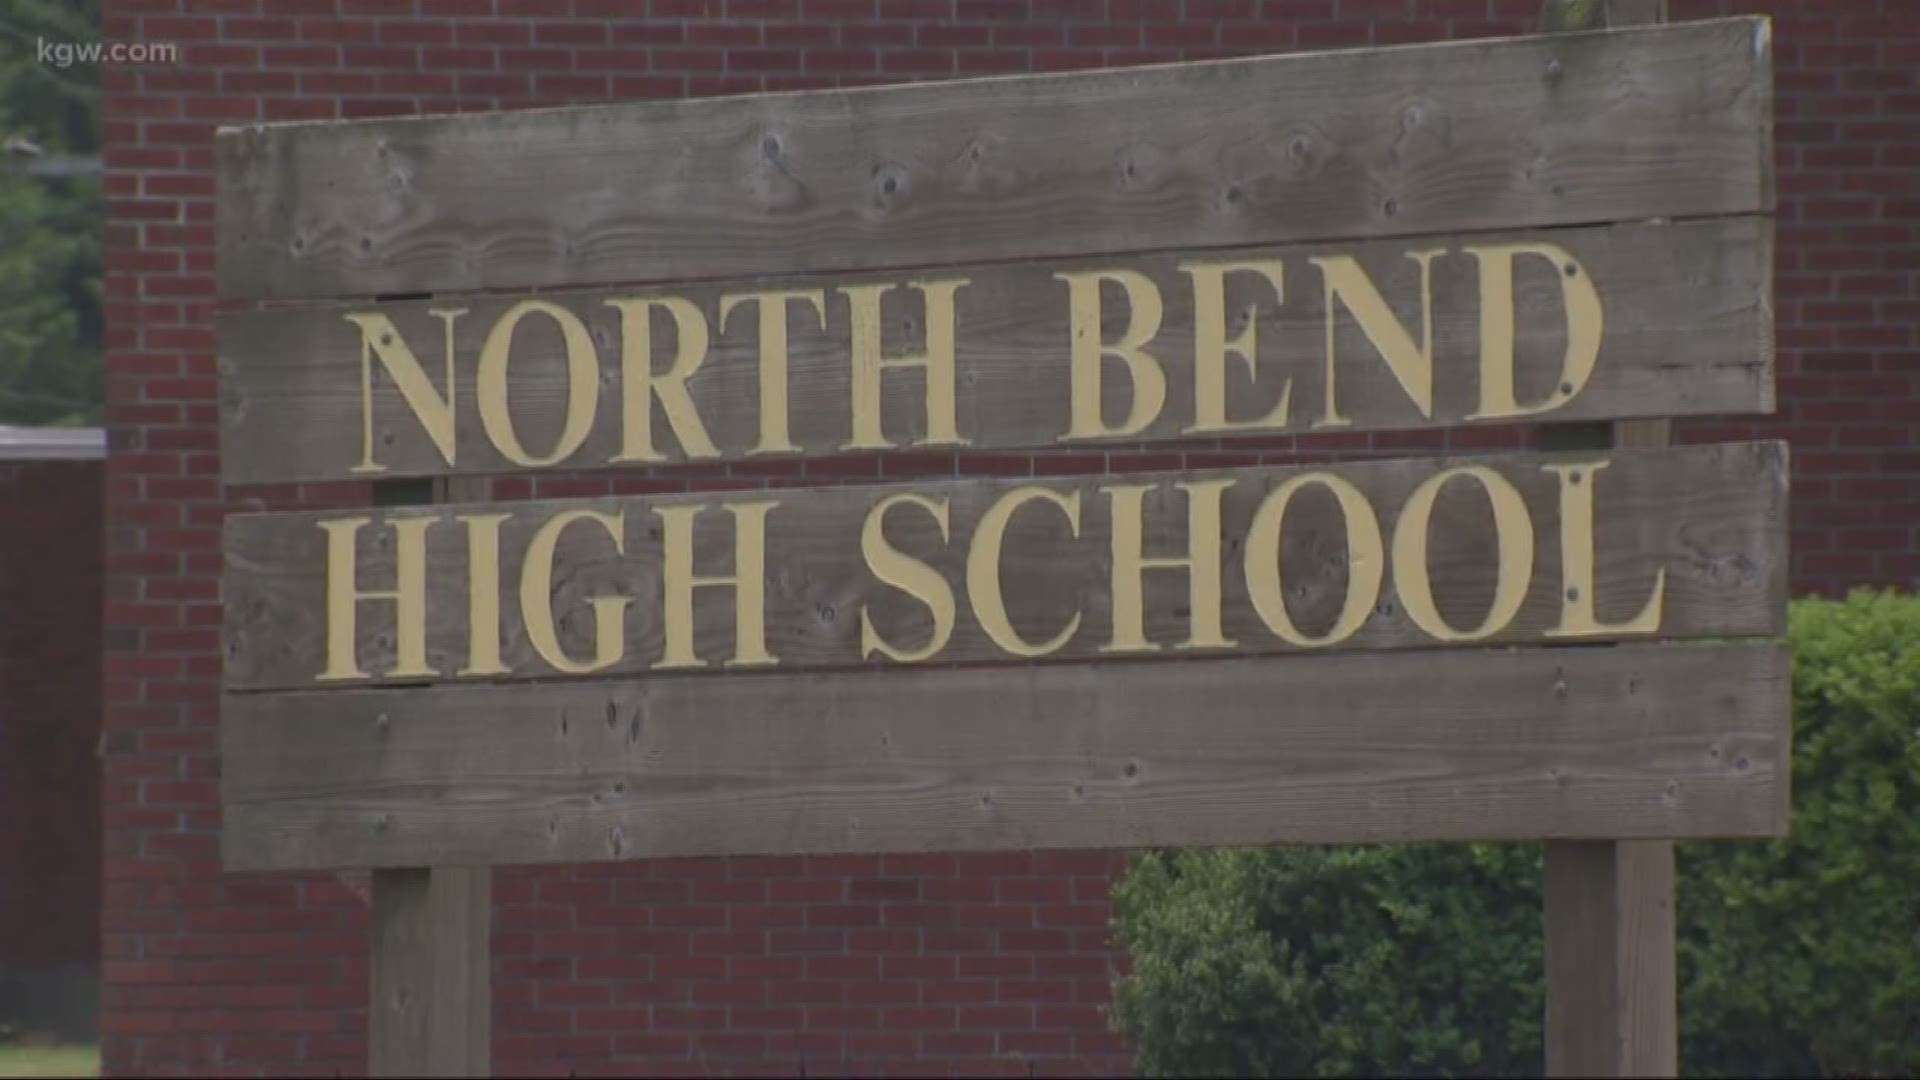 Students in North Bend are speaking out about anti-gay harassment.